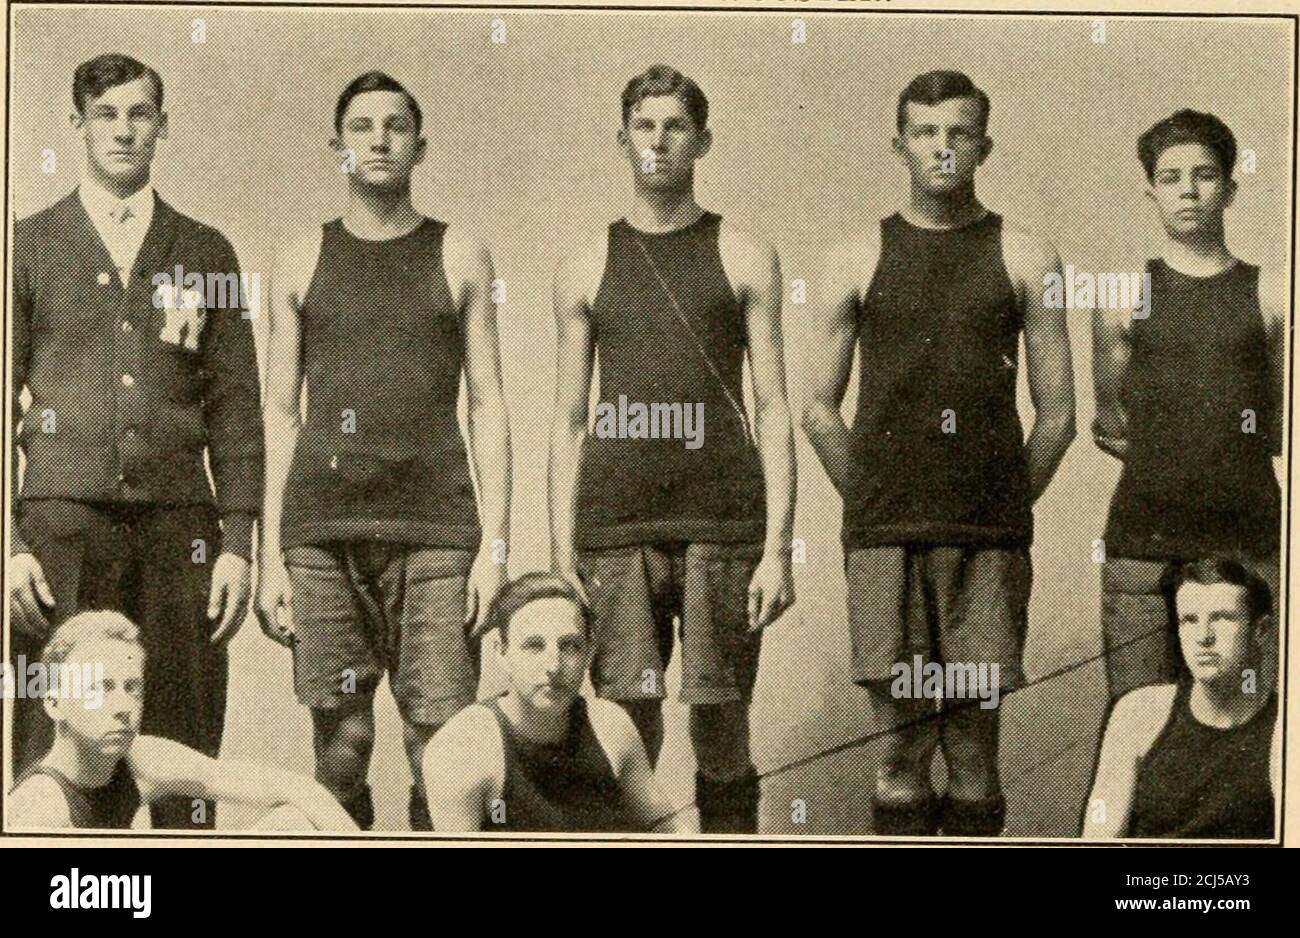 . Spalding's official collegiate basket ball guide . h yv/*!iH &lt;^afb: 2- Chamberlain. Mgrr.; 3. Forman: 4, Lehman; 5,HackPtt: P.. Jonnson: r, Collins. Capt.; 8. Whito; 9. Cameron; 10, Compton; rXTVEKSITY OF WOOSTER. 1, Tinkham Coach: 2. Kocktitzky; 3, Steele; 4, Llewellyn; 5, RockTvell; B. Smiley; 7, Davis, Capt.; 8. Koontz. Martland. Photo. WESTMINSTER COLLEGE, FULTON, MO. SPALDINGS ATHLETIC LIBRARY. 127 1901—oi1602—031903—04 PRINCETON-fPrinceton. 22; Harvard, 14.I Princeton. 81; Harvard. 28.[Princeton, 9; Harvard, 24.[Princeton. 28; Harvard, 29.lygrinceton, 8; Harvard. 17.[PV-inceton, 40; Stock Photo